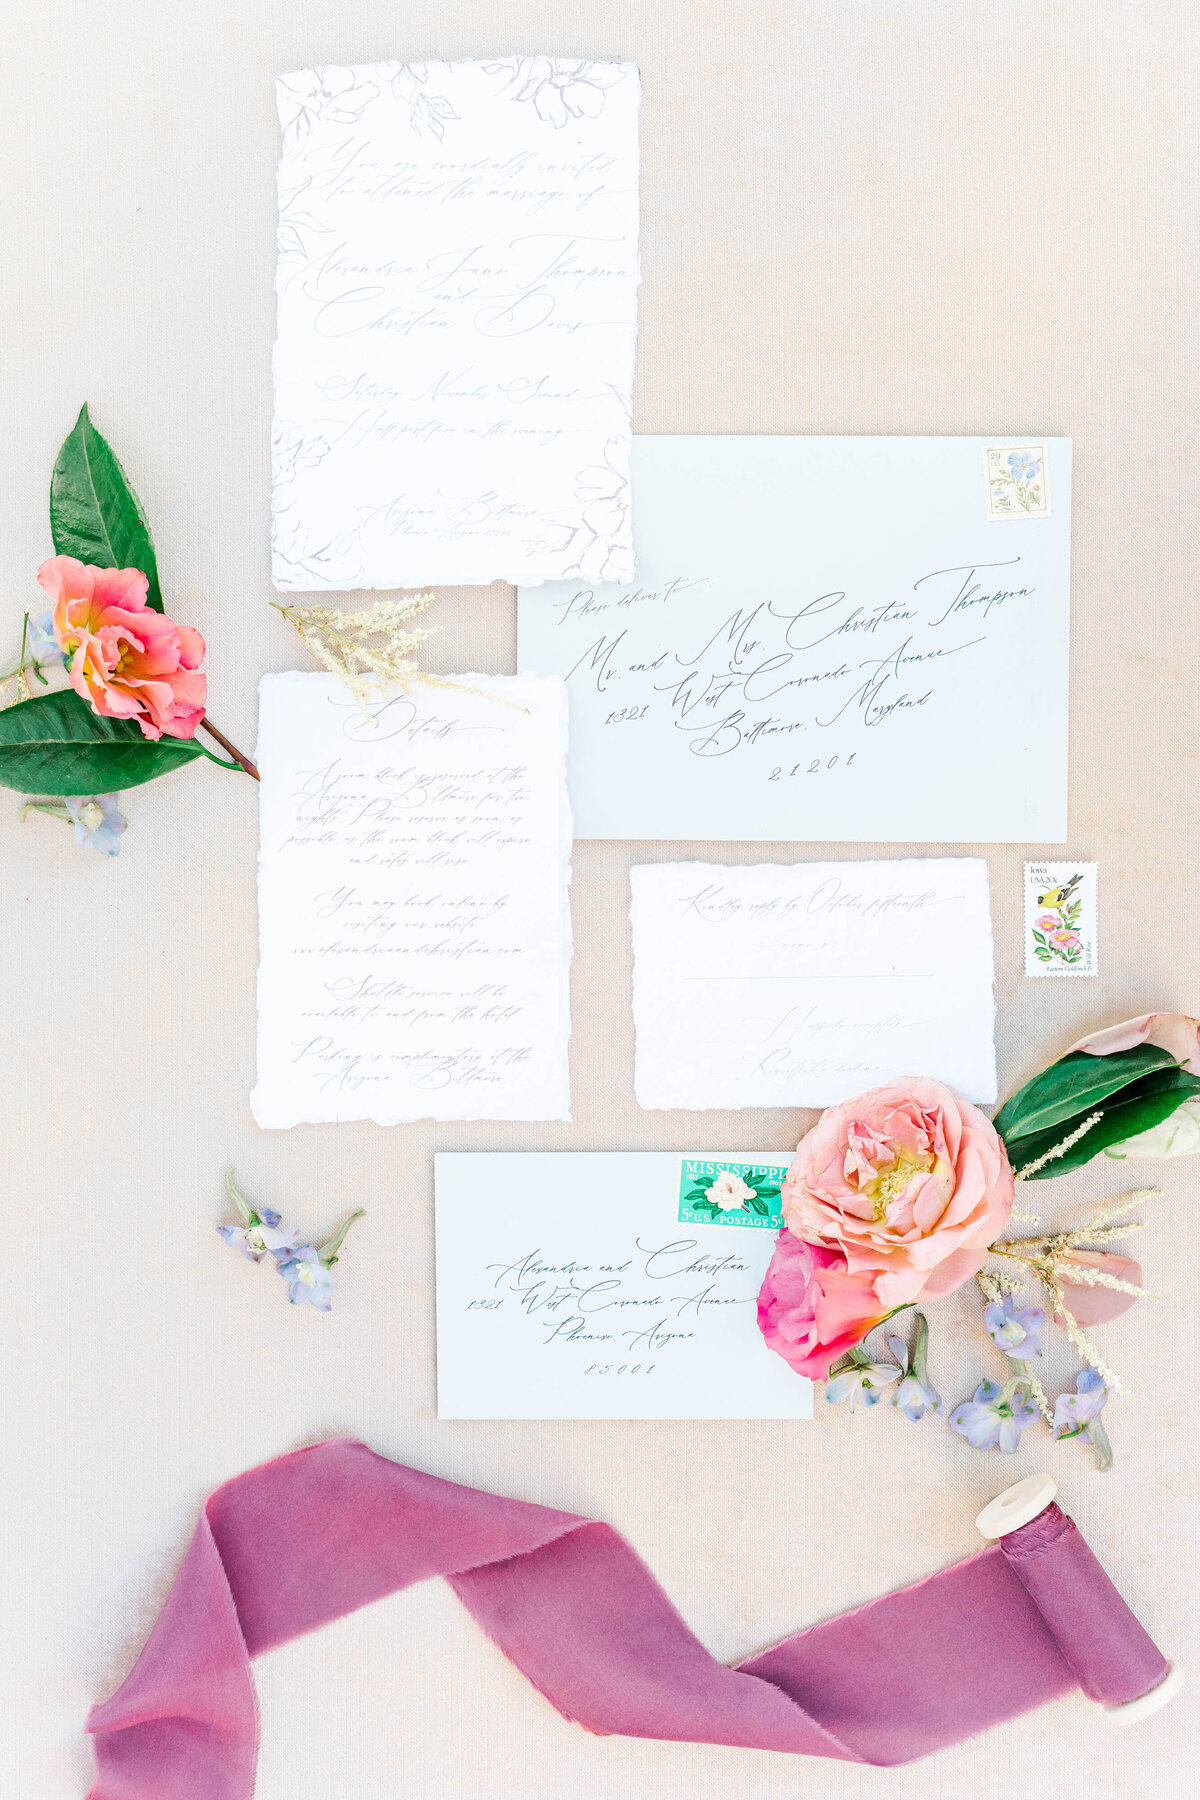 Wedding invitation suite with roses and pink ribbon